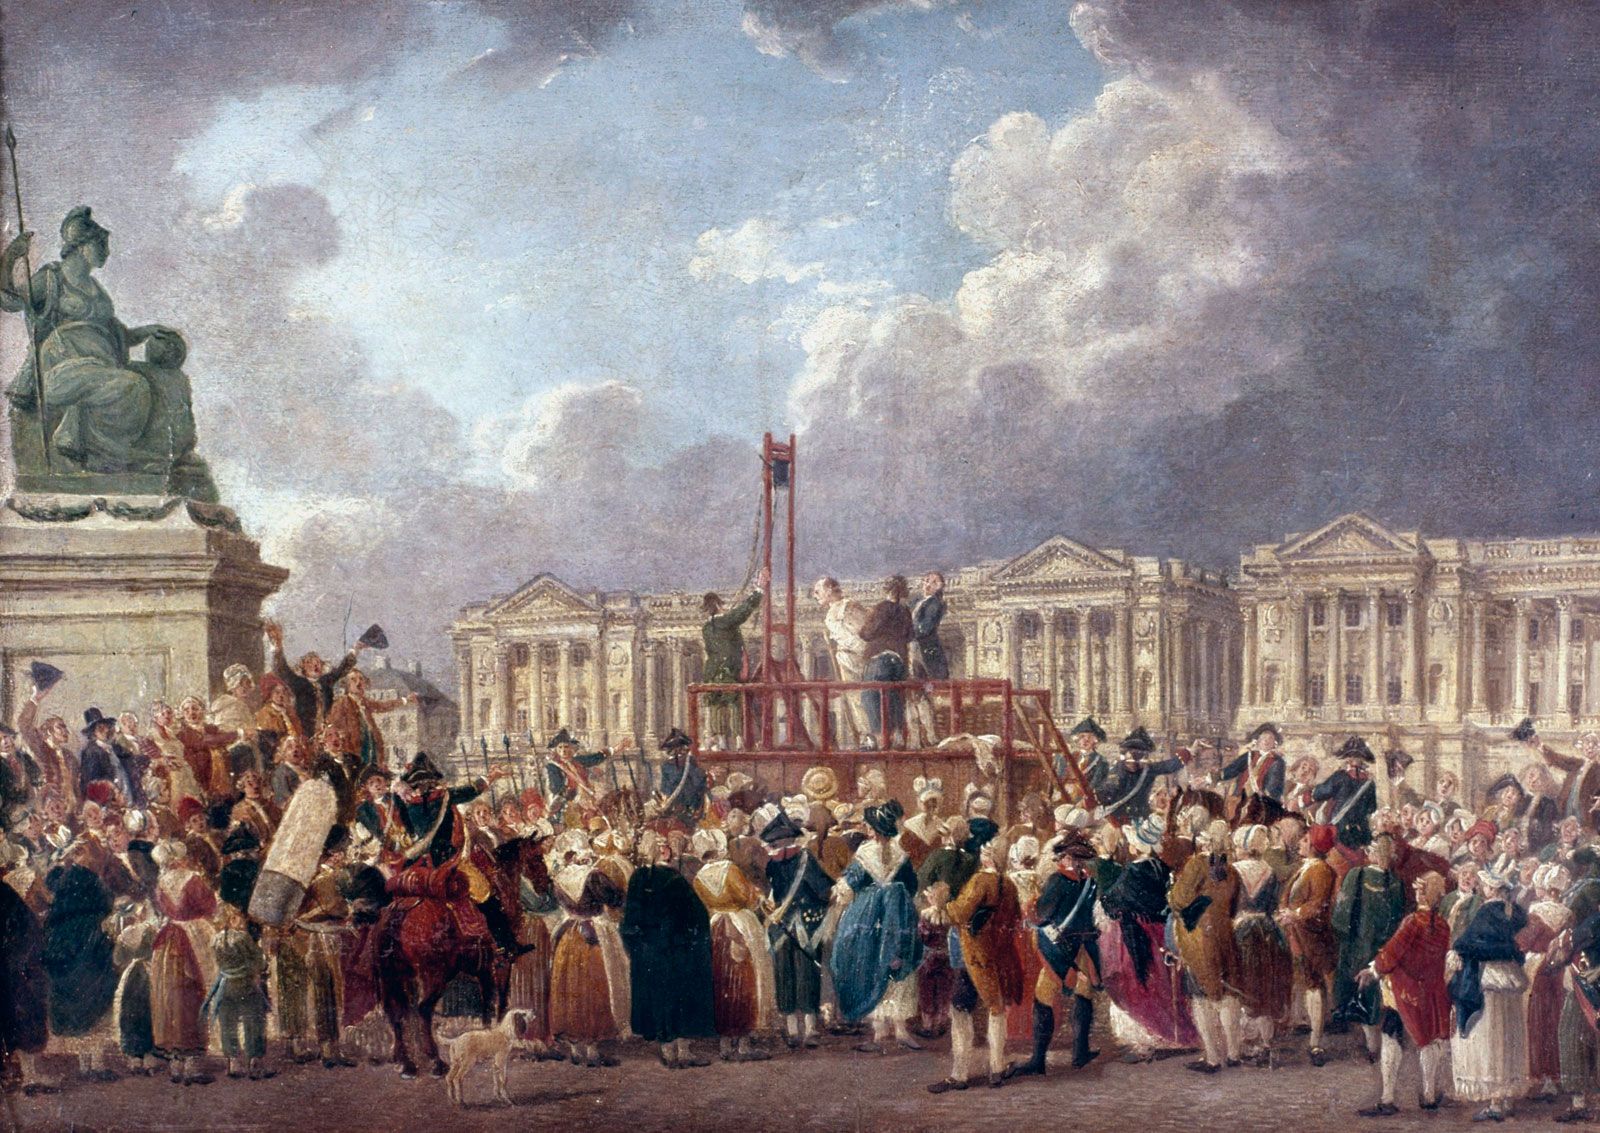 The Reign of Terror, 1793-1794 | The French Revolution